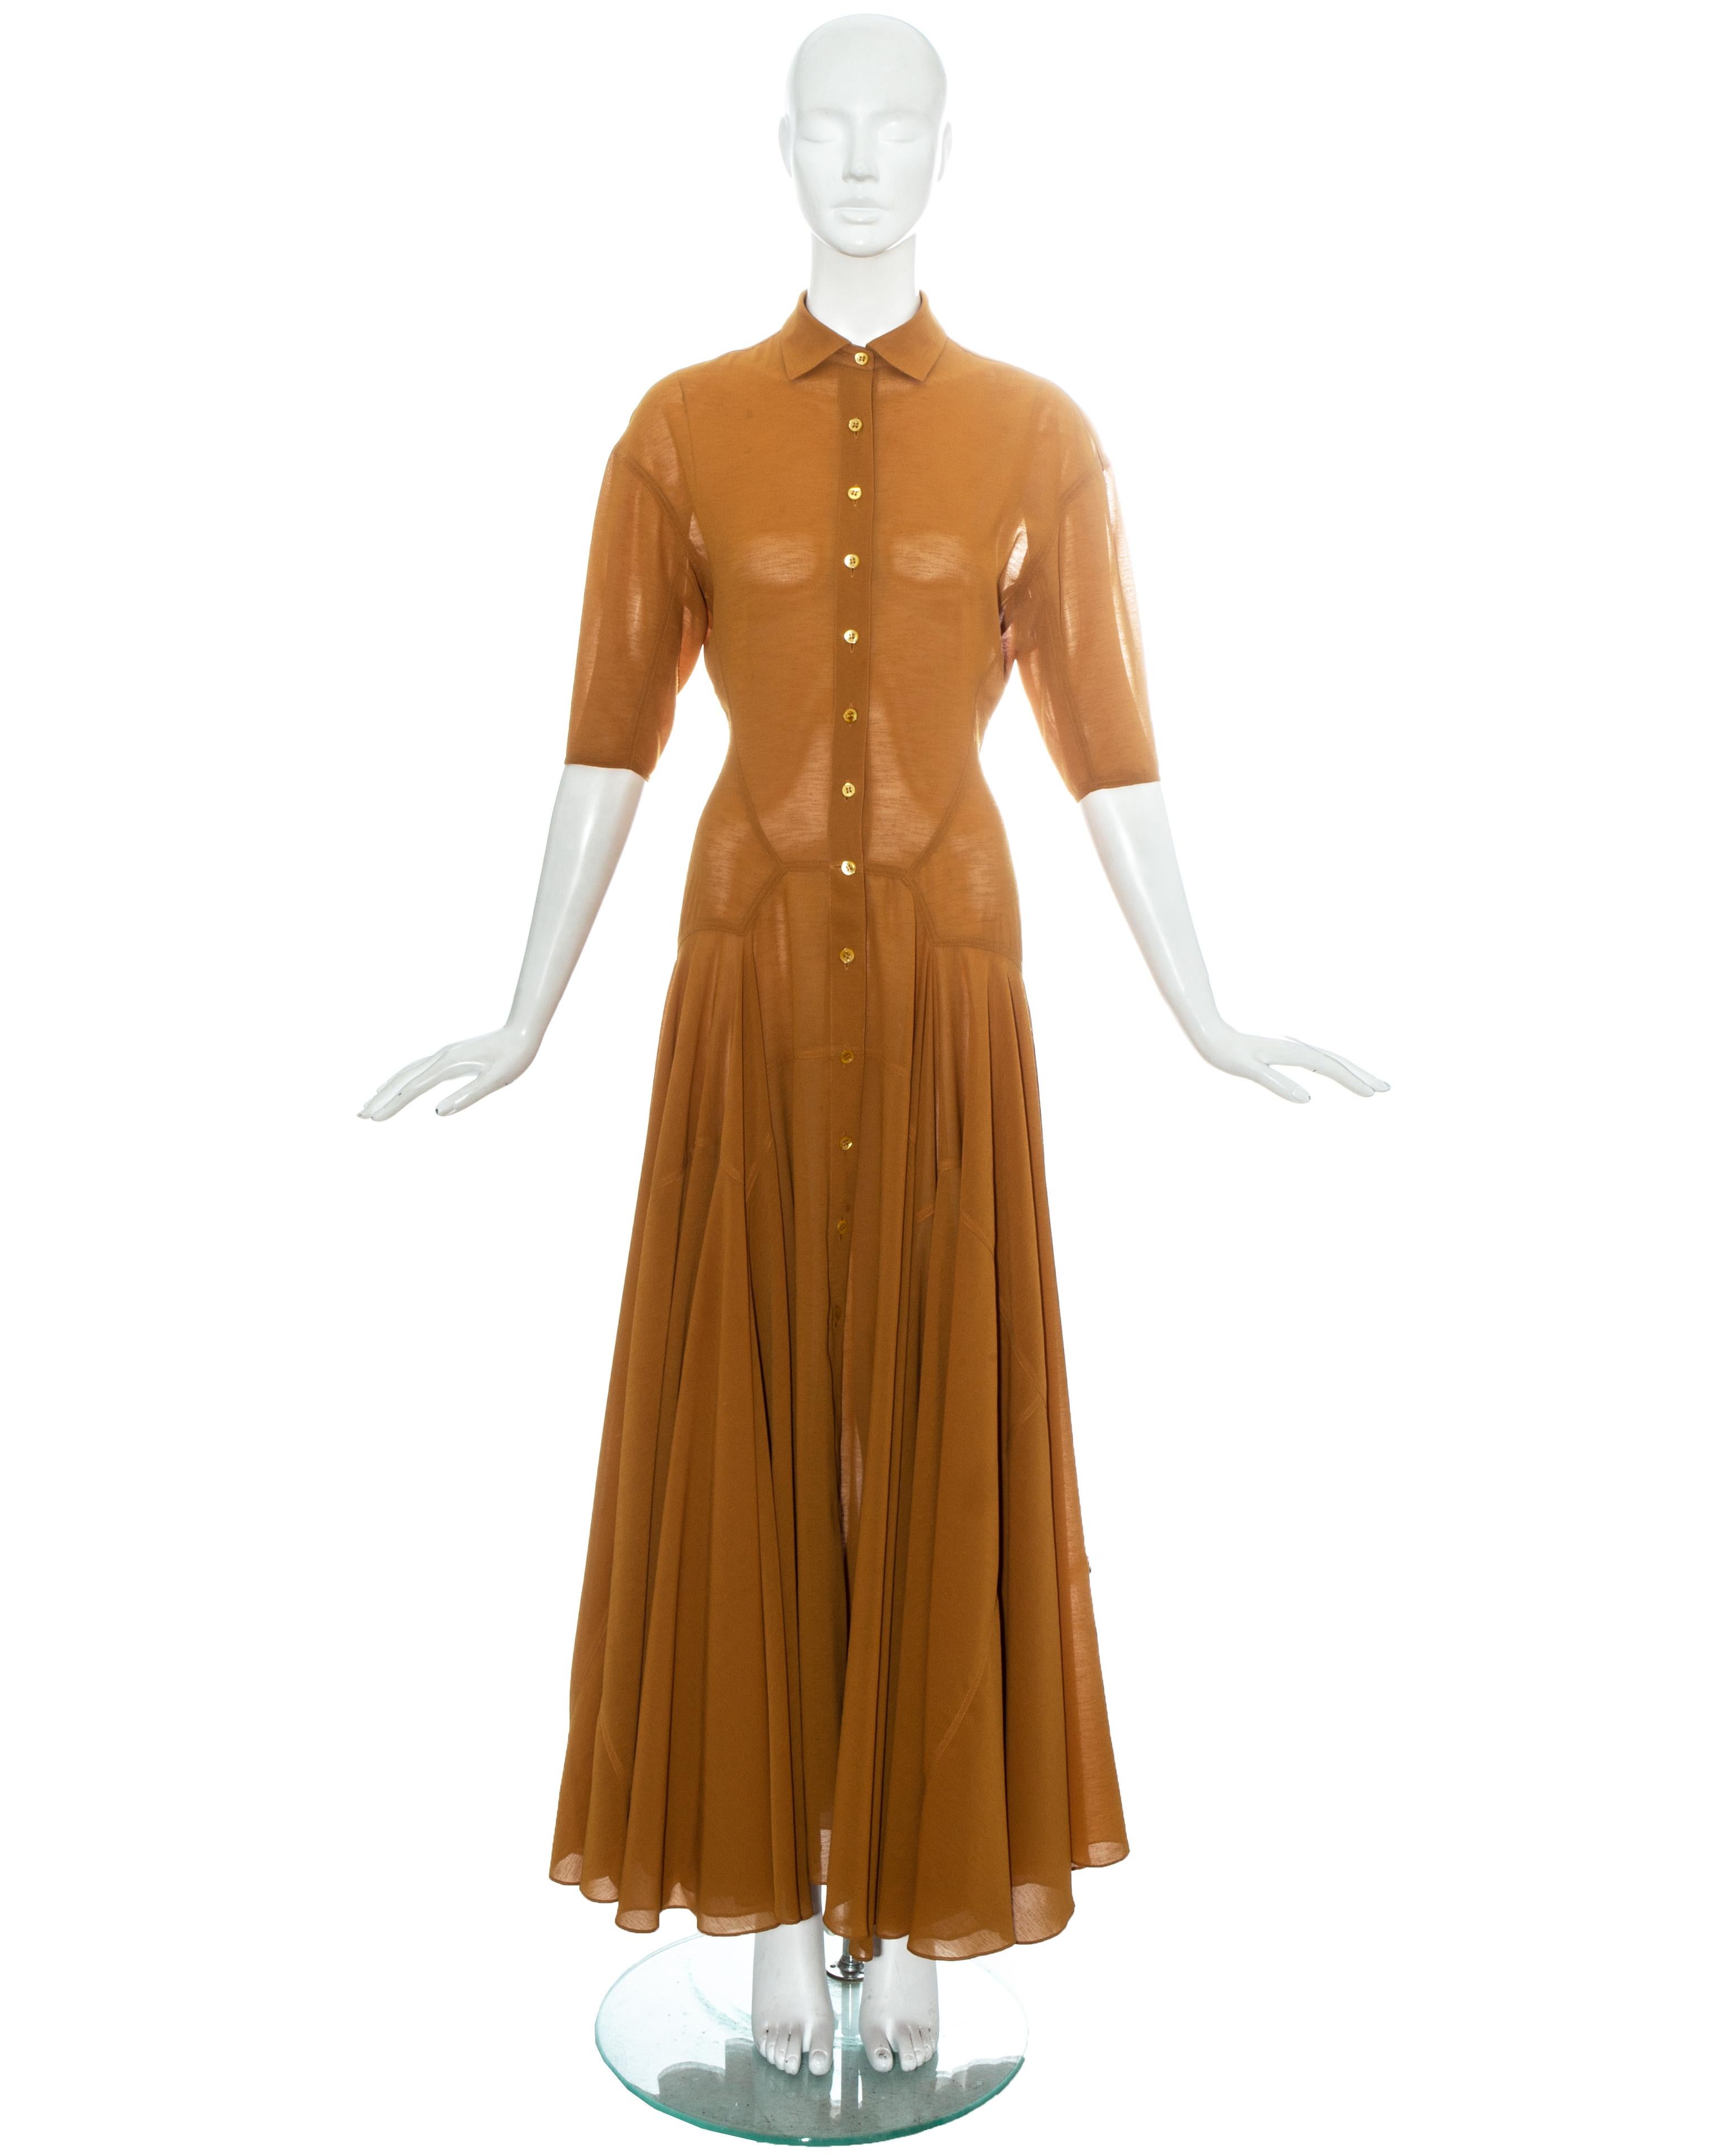 Azzedine Alaia bronze viscose maxi shirt dress with nine button closures, pointed collar and full skirt beginning at the hips. 

The dress is constructed entirely with flat-felled seams - placed so well that the fabric moulds to the body in such a